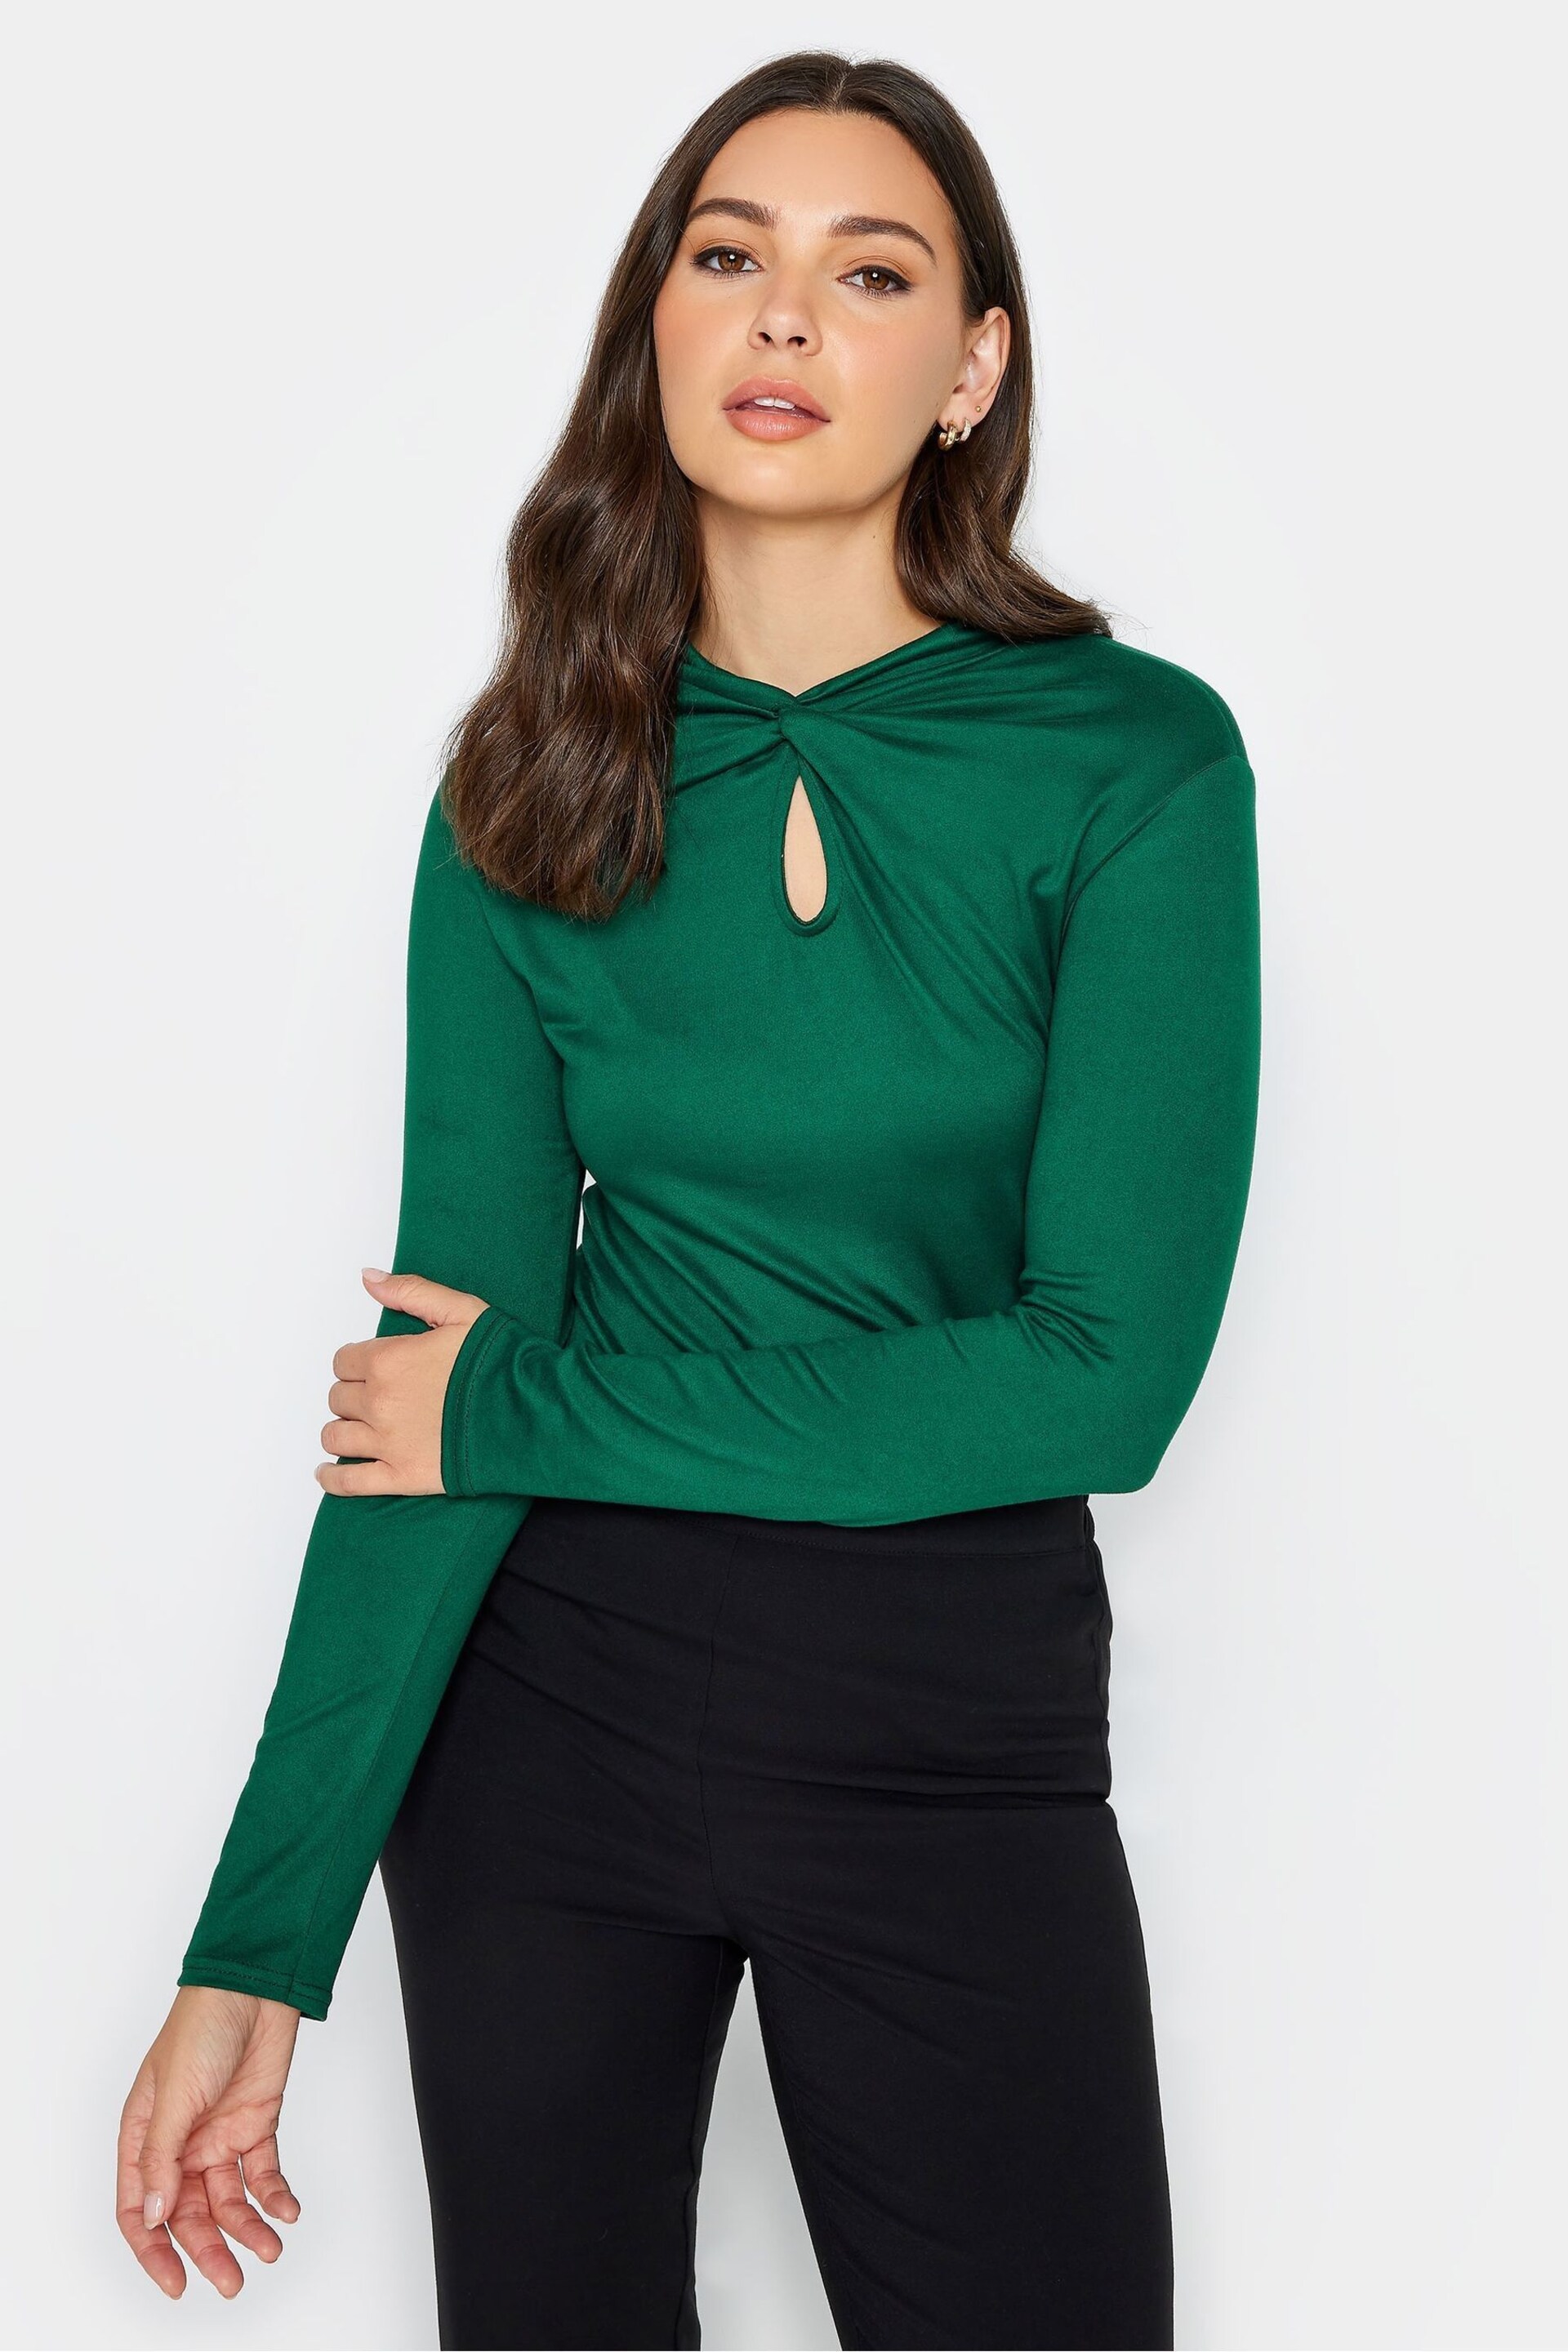 Long Tall Sally Green Twist Front Keyhole Top - Image 1 of 4